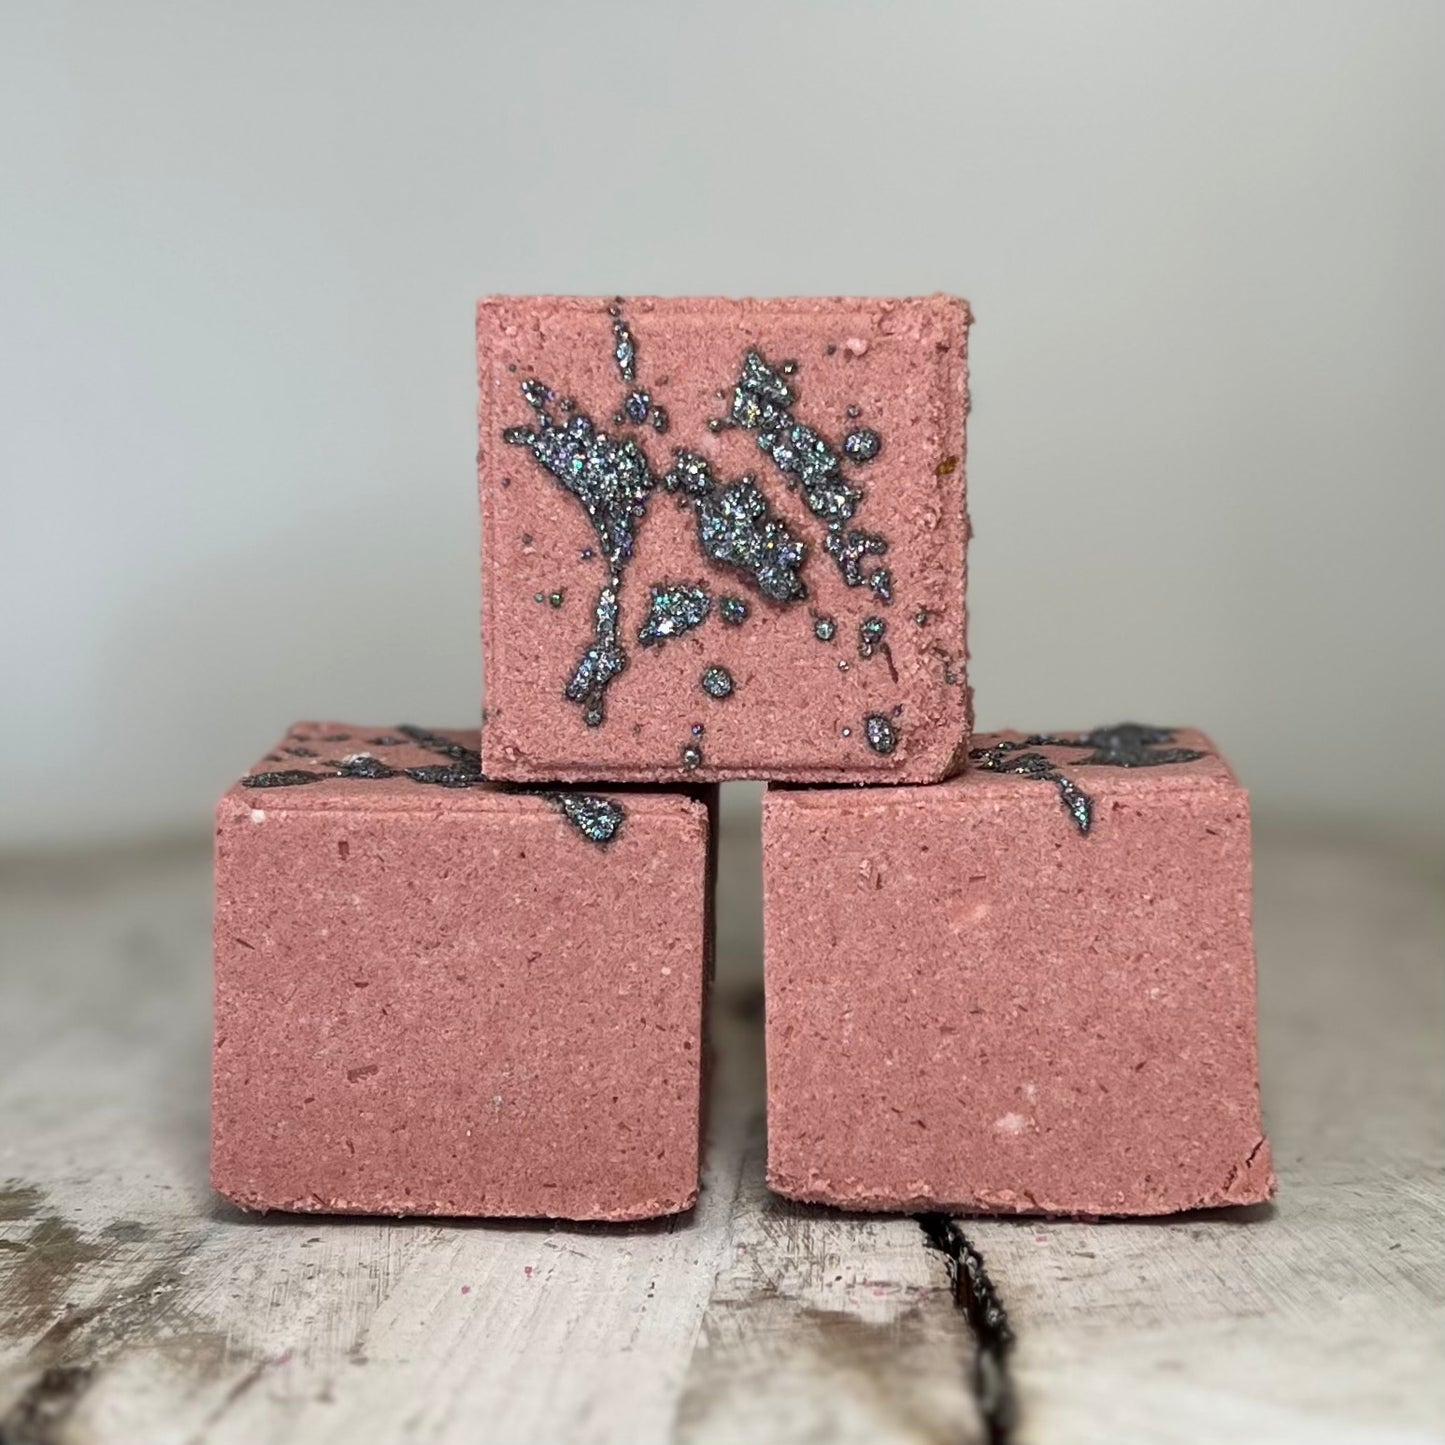 Create Your Own Bath Bomb - The Wooden Boar Soap Company